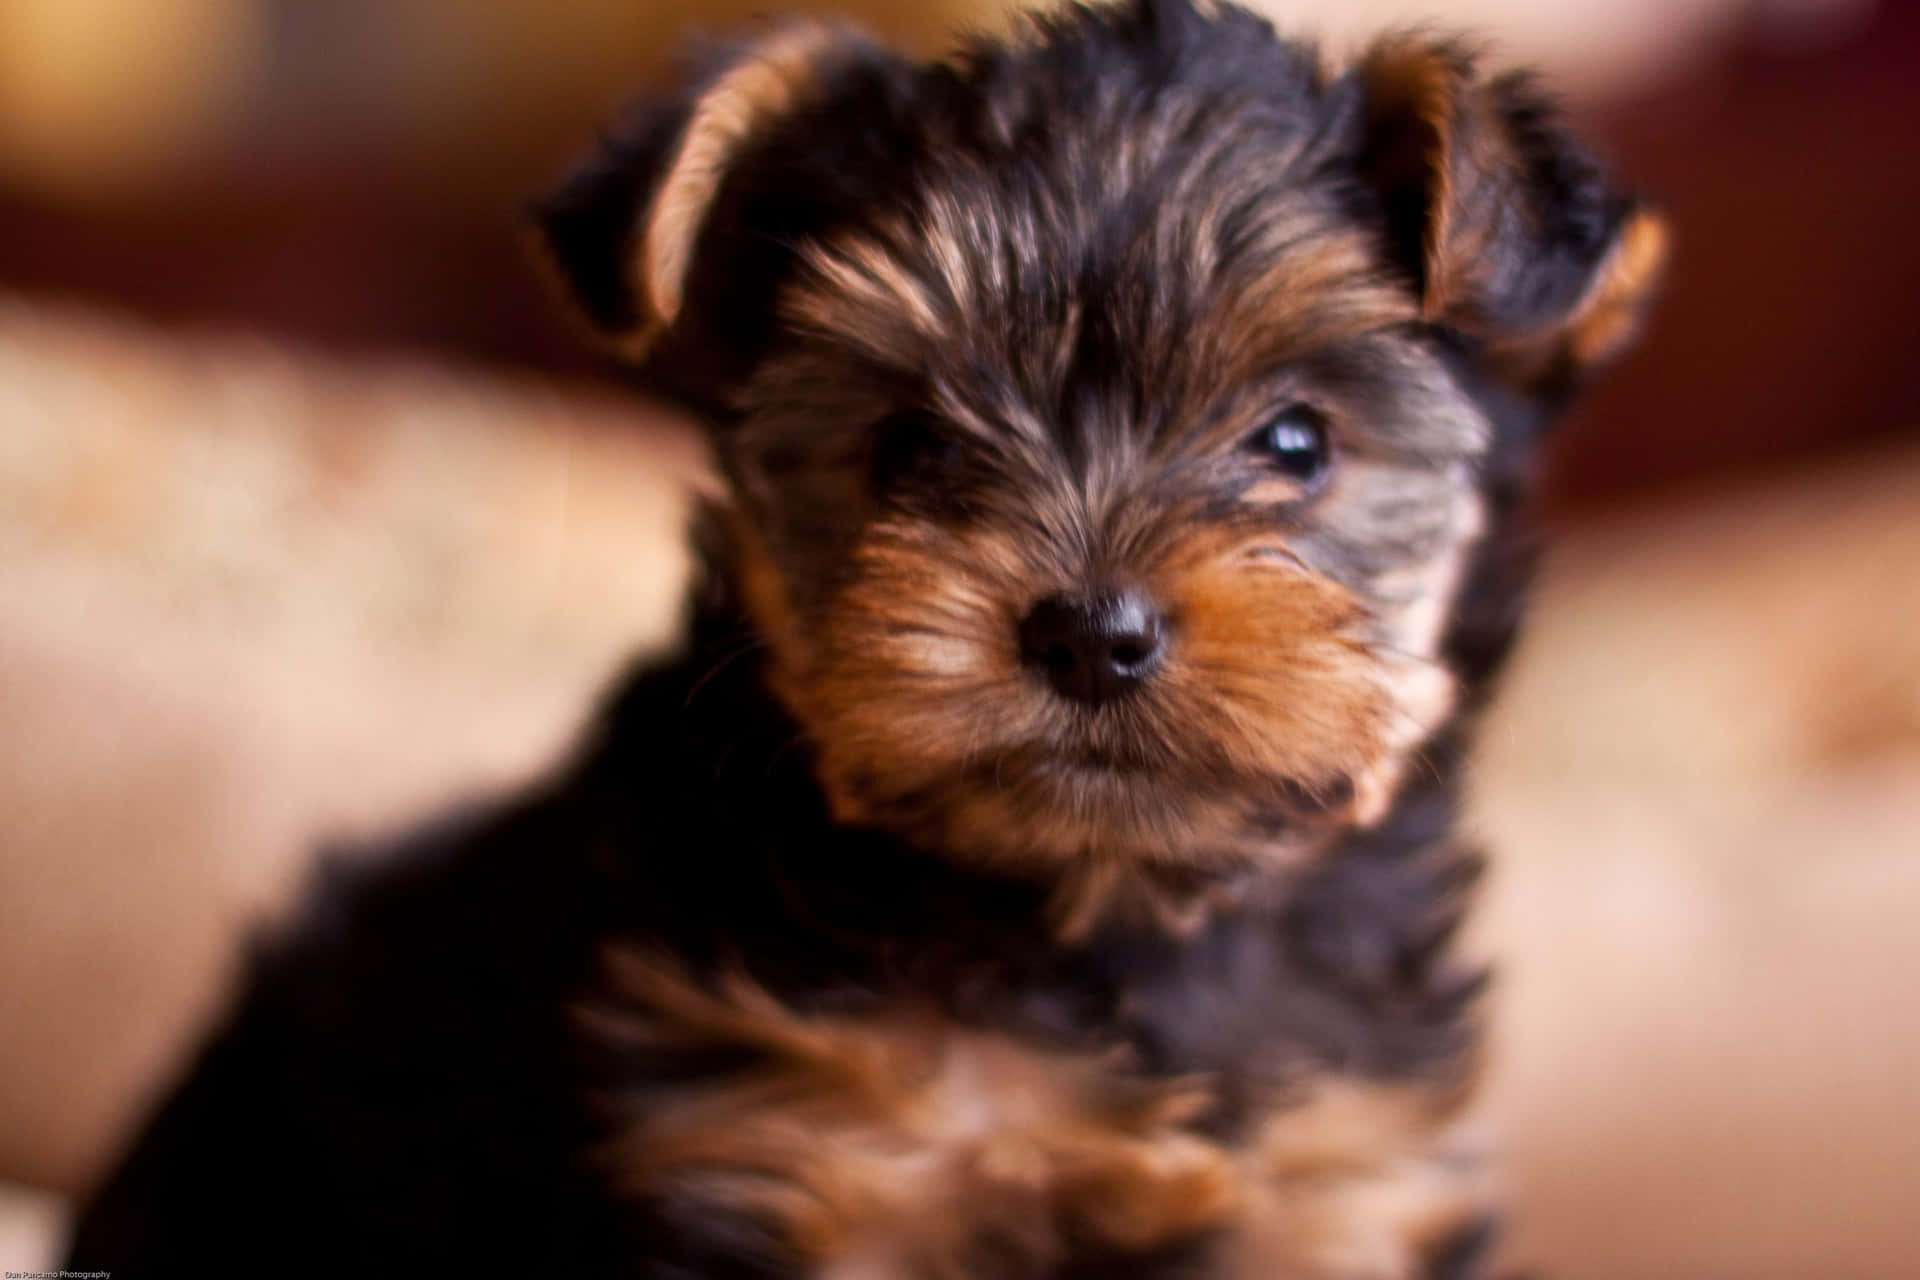 A Teacup Yorkie filled with joy and love! Wallpaper